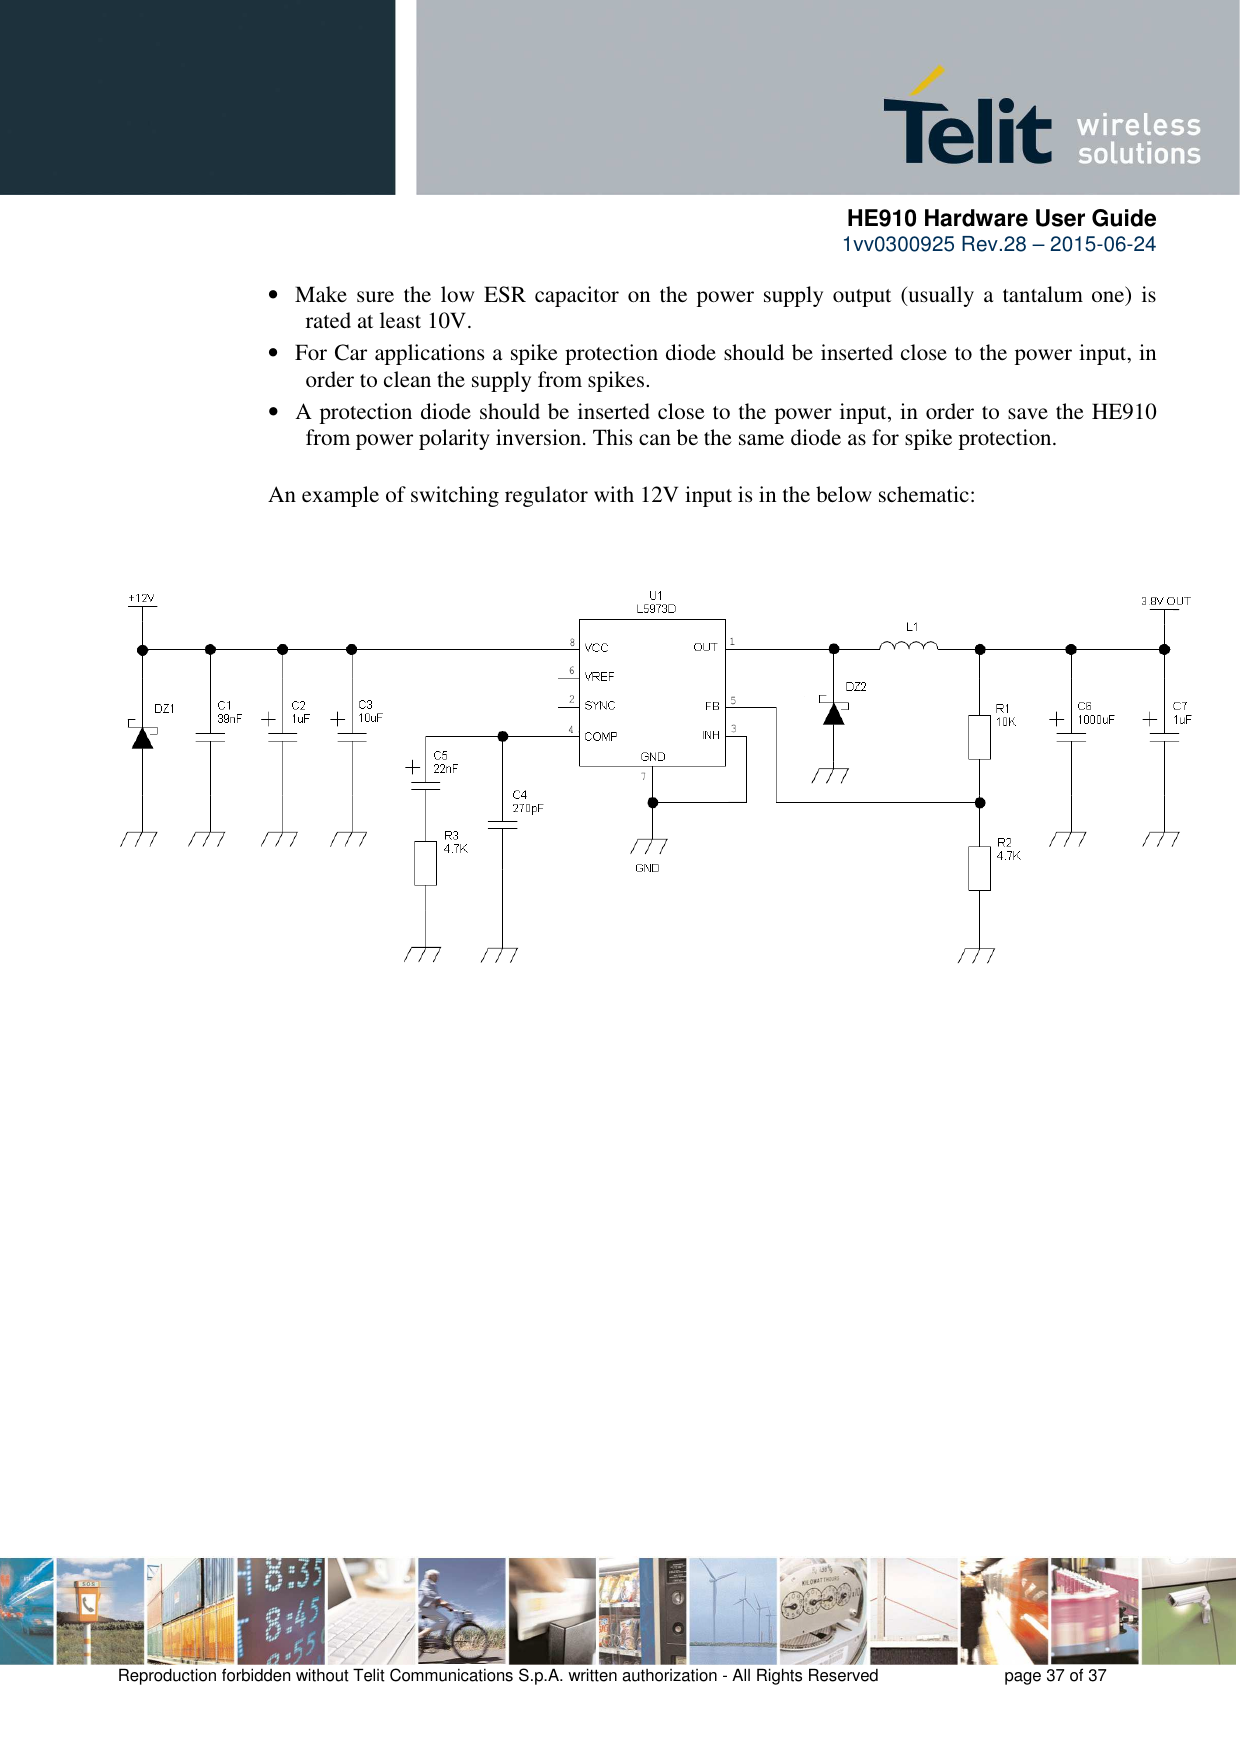      HE910 Hardware User Guide 1vv0300925 Rev.28 – 2015-06-24    Reproduction forbidden without Telit Communications S.p.A. written authorization - All Rights Reserved    page 37 of 37  • Make sure the low ESR capacitor on the power supply output (usually a tantalum  one) is rated at least 10V. • For Car applications a spike protection diode should be inserted close to the power input, in order to clean the supply from spikes.  • A protection diode should be inserted close to the power input, in order to save the HE910 from power polarity inversion. This can be the same diode as for spike protection.  An example of switching regulator with 12V input is in the below schematic:     